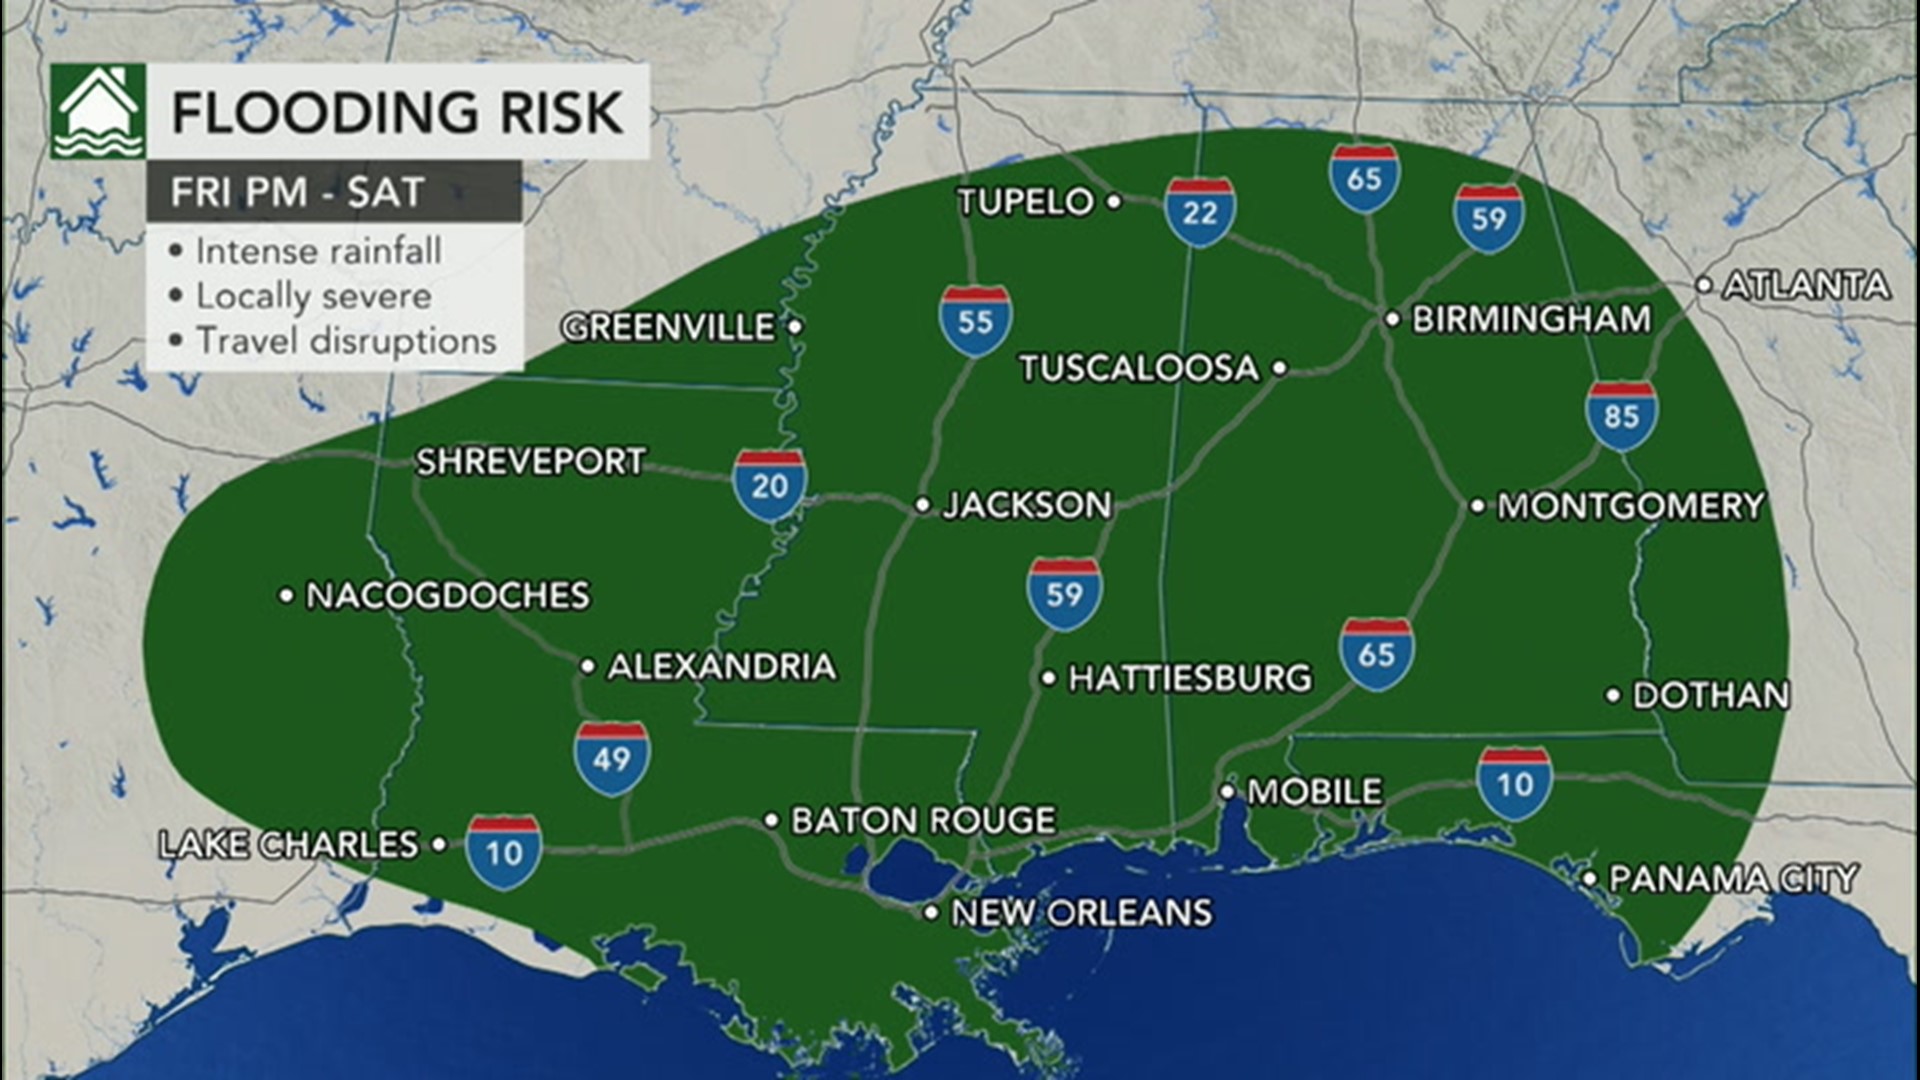 In addition to the potential for damaging winds and tornadoes, Bernie Rayno said he is concerned about the risk of flooding across a large part of the South.